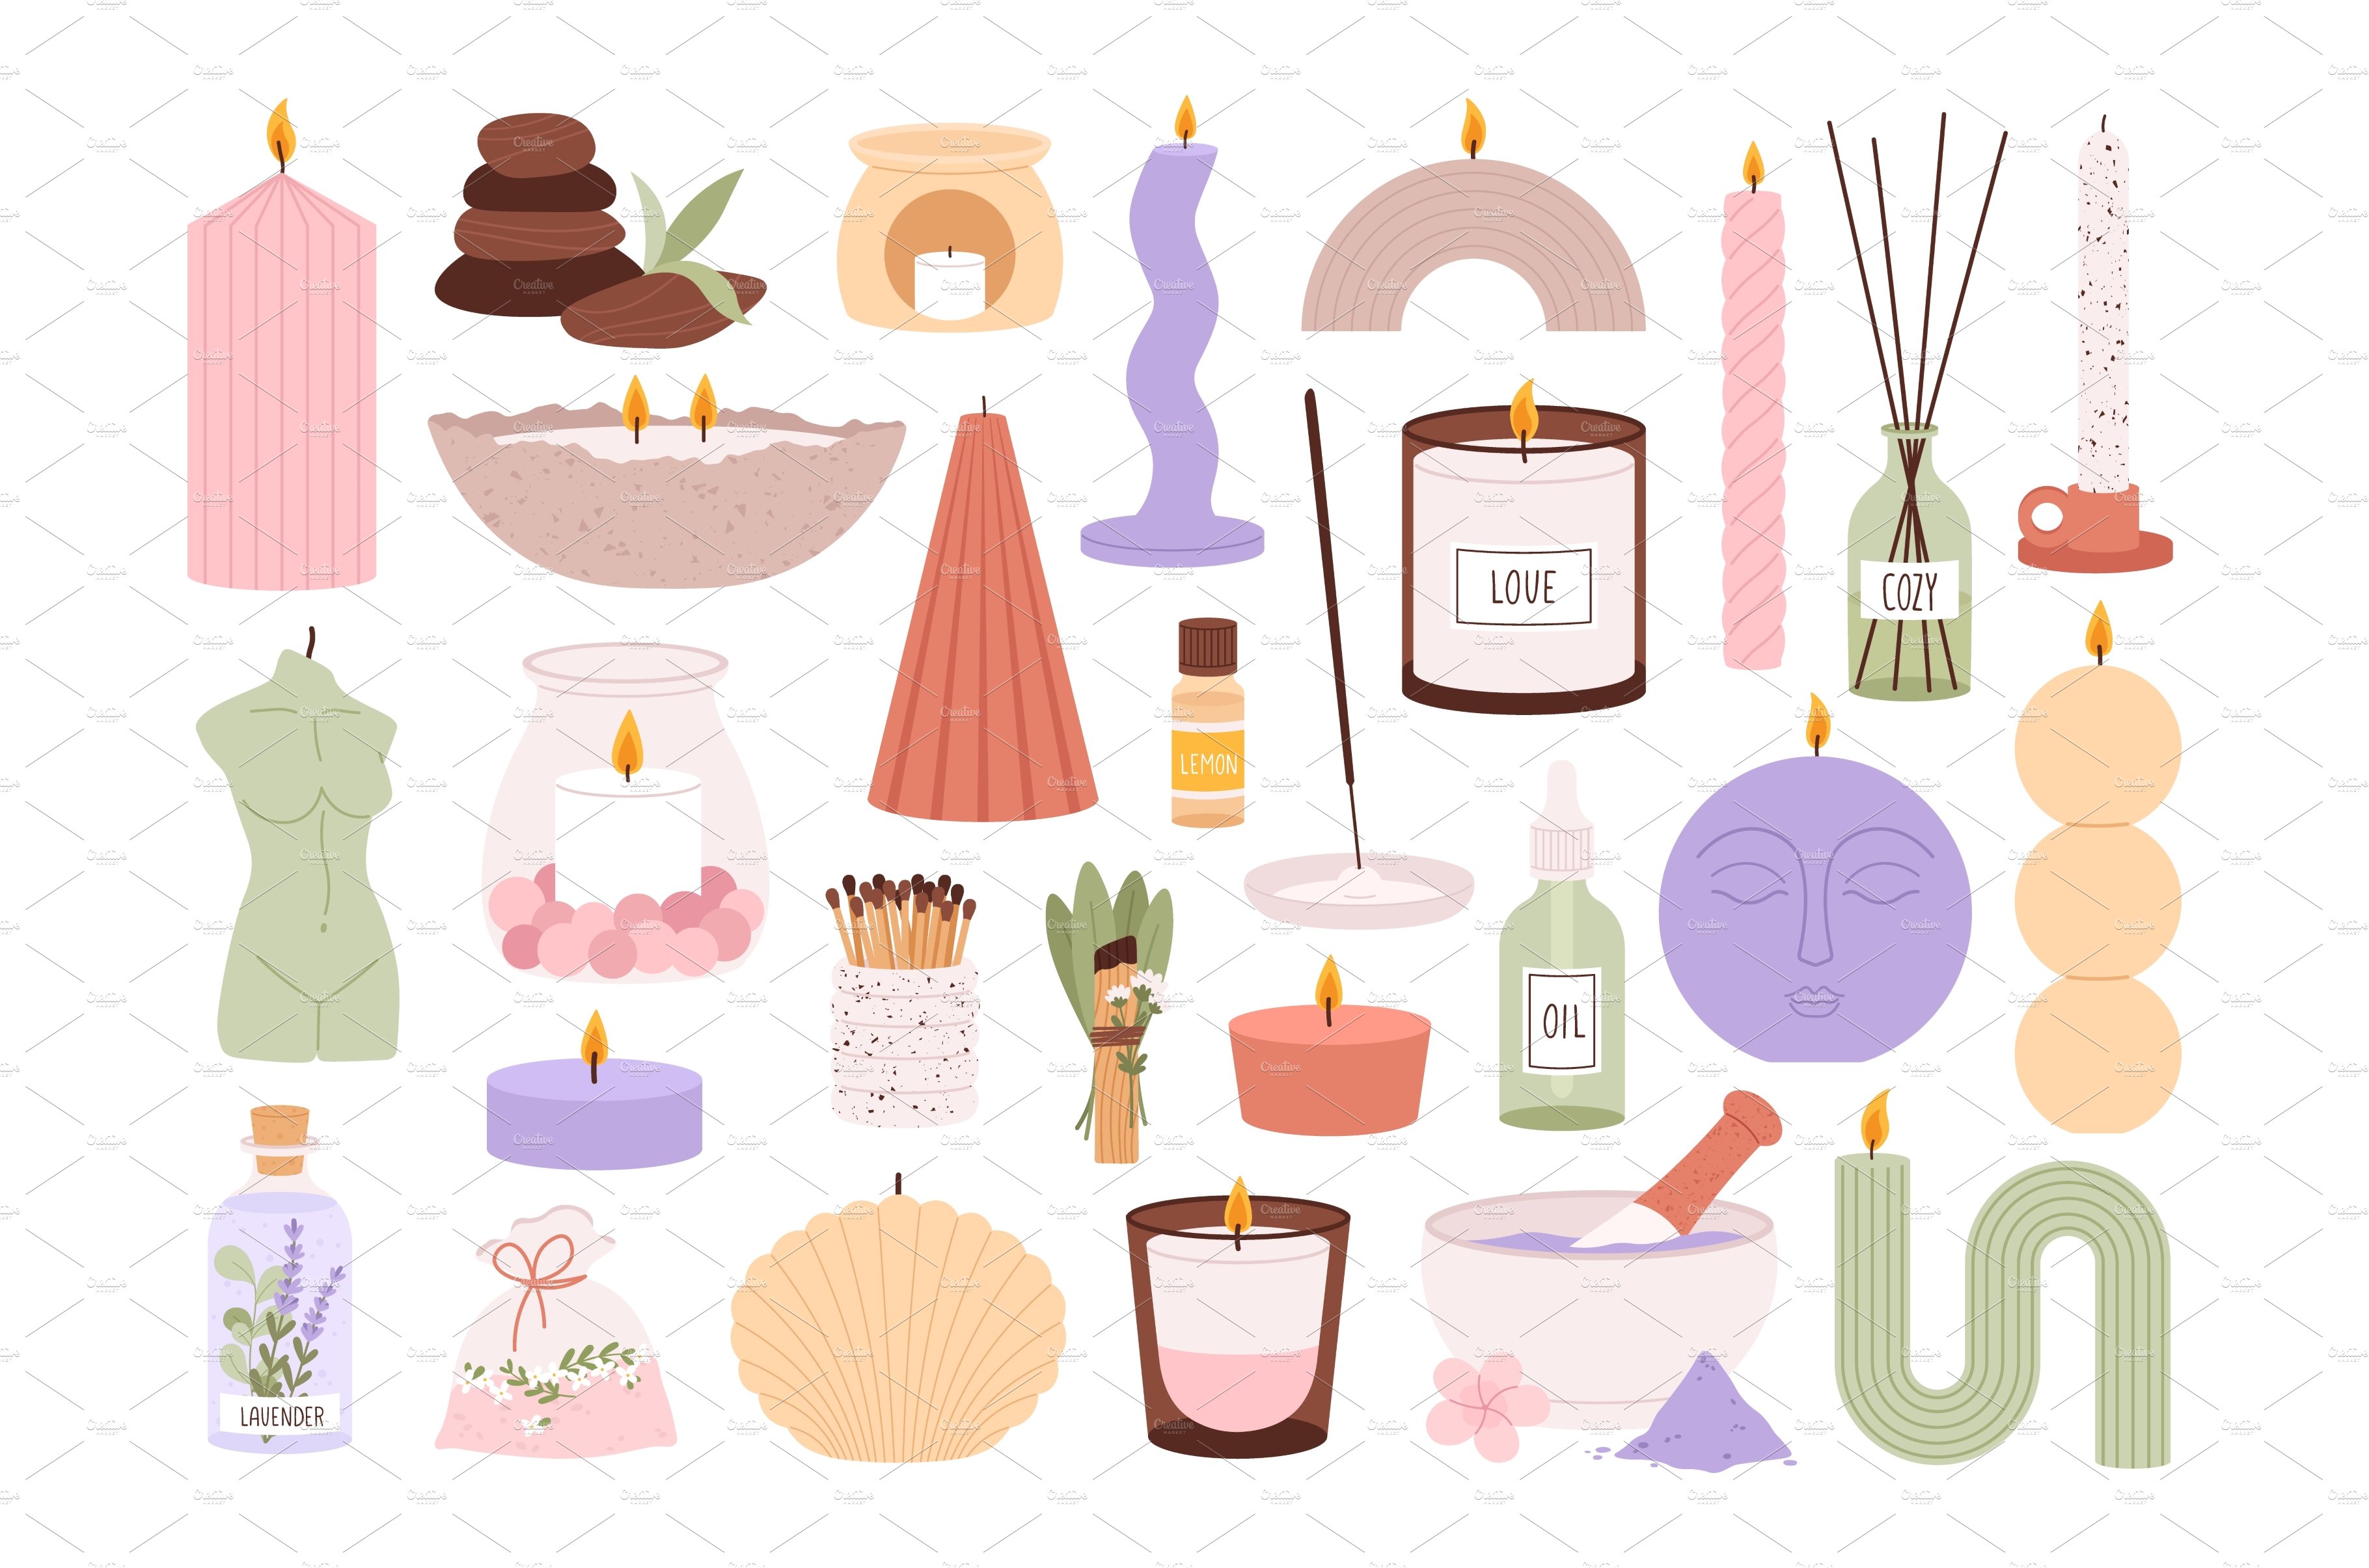 Home aroma candles, incense and cover image.